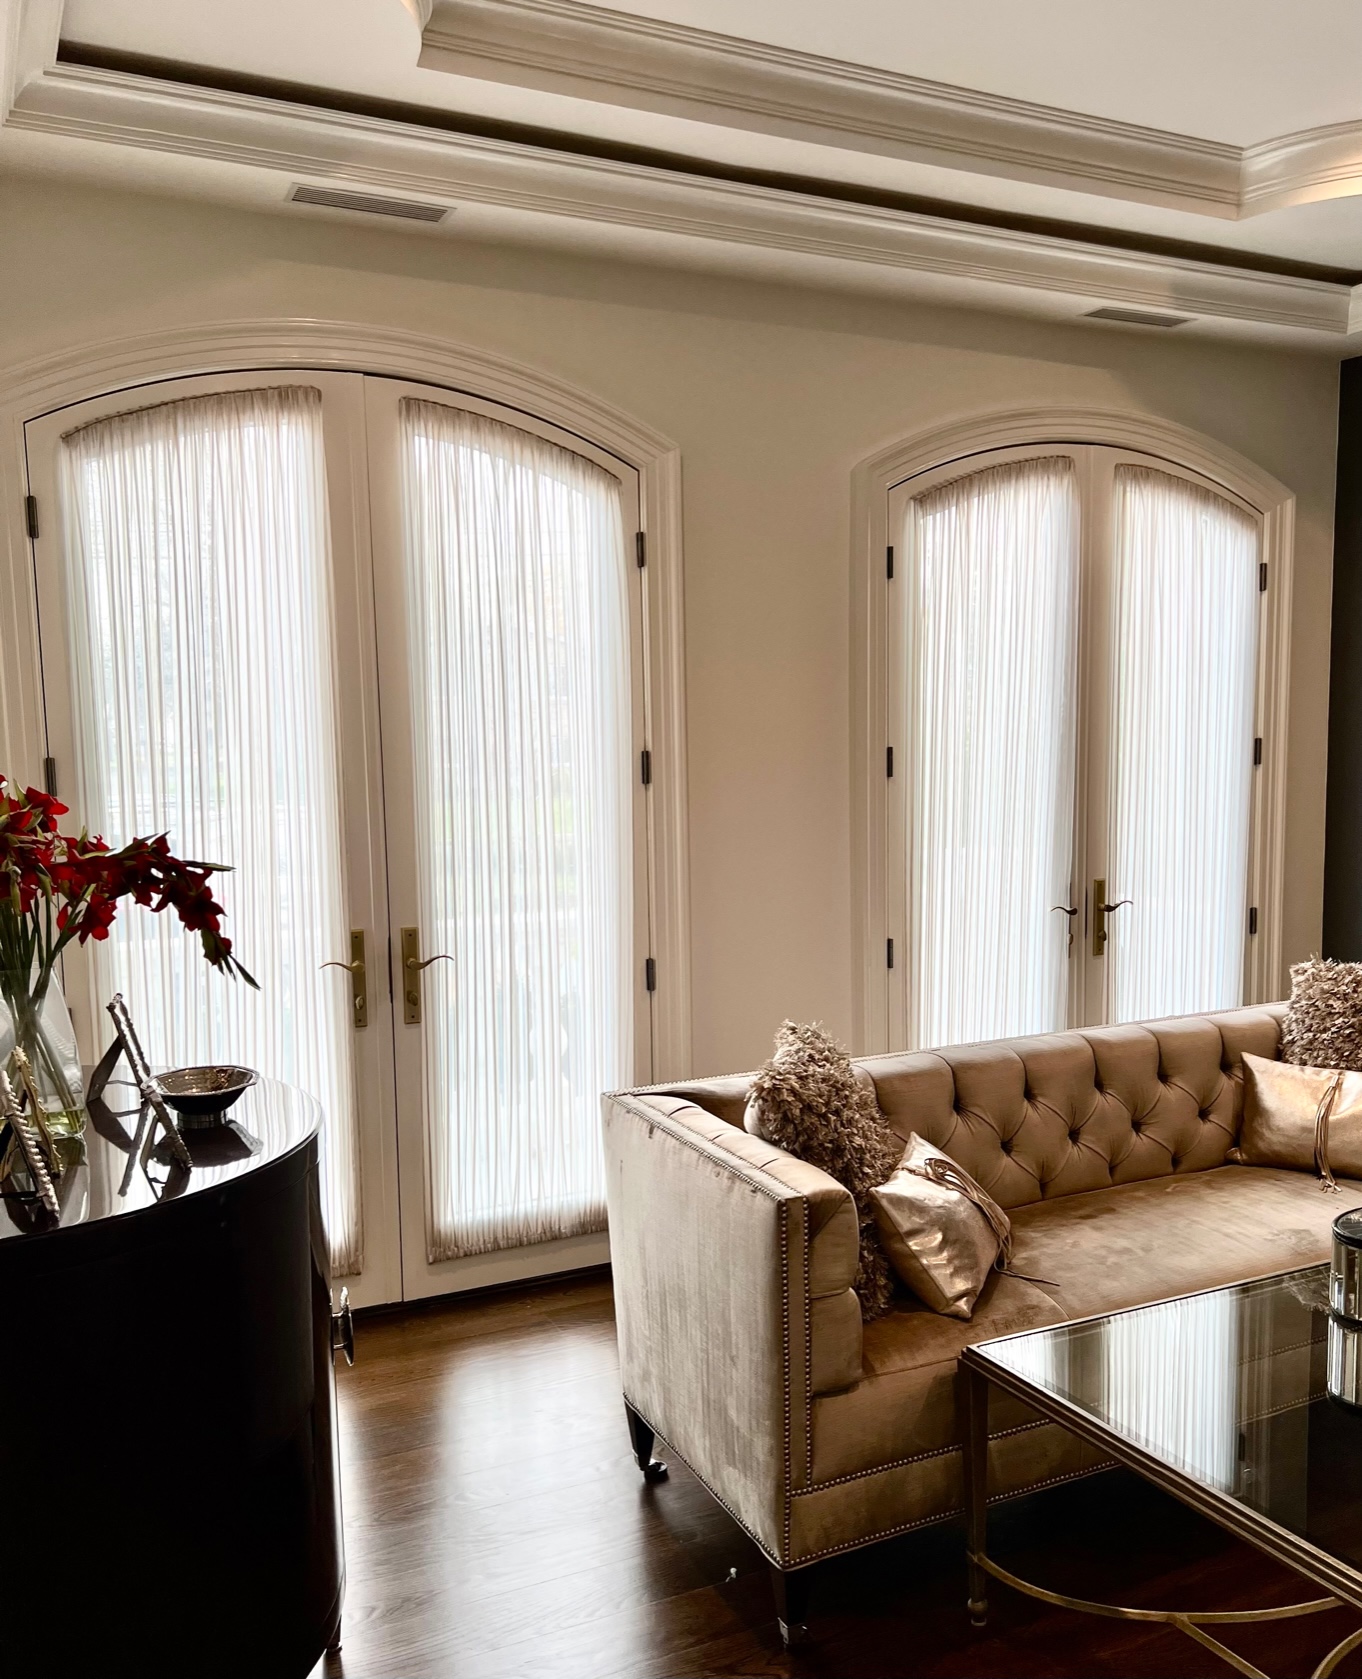 Shirred Sheer Stretch Drapery Panels on Arched French Doors in Living Room